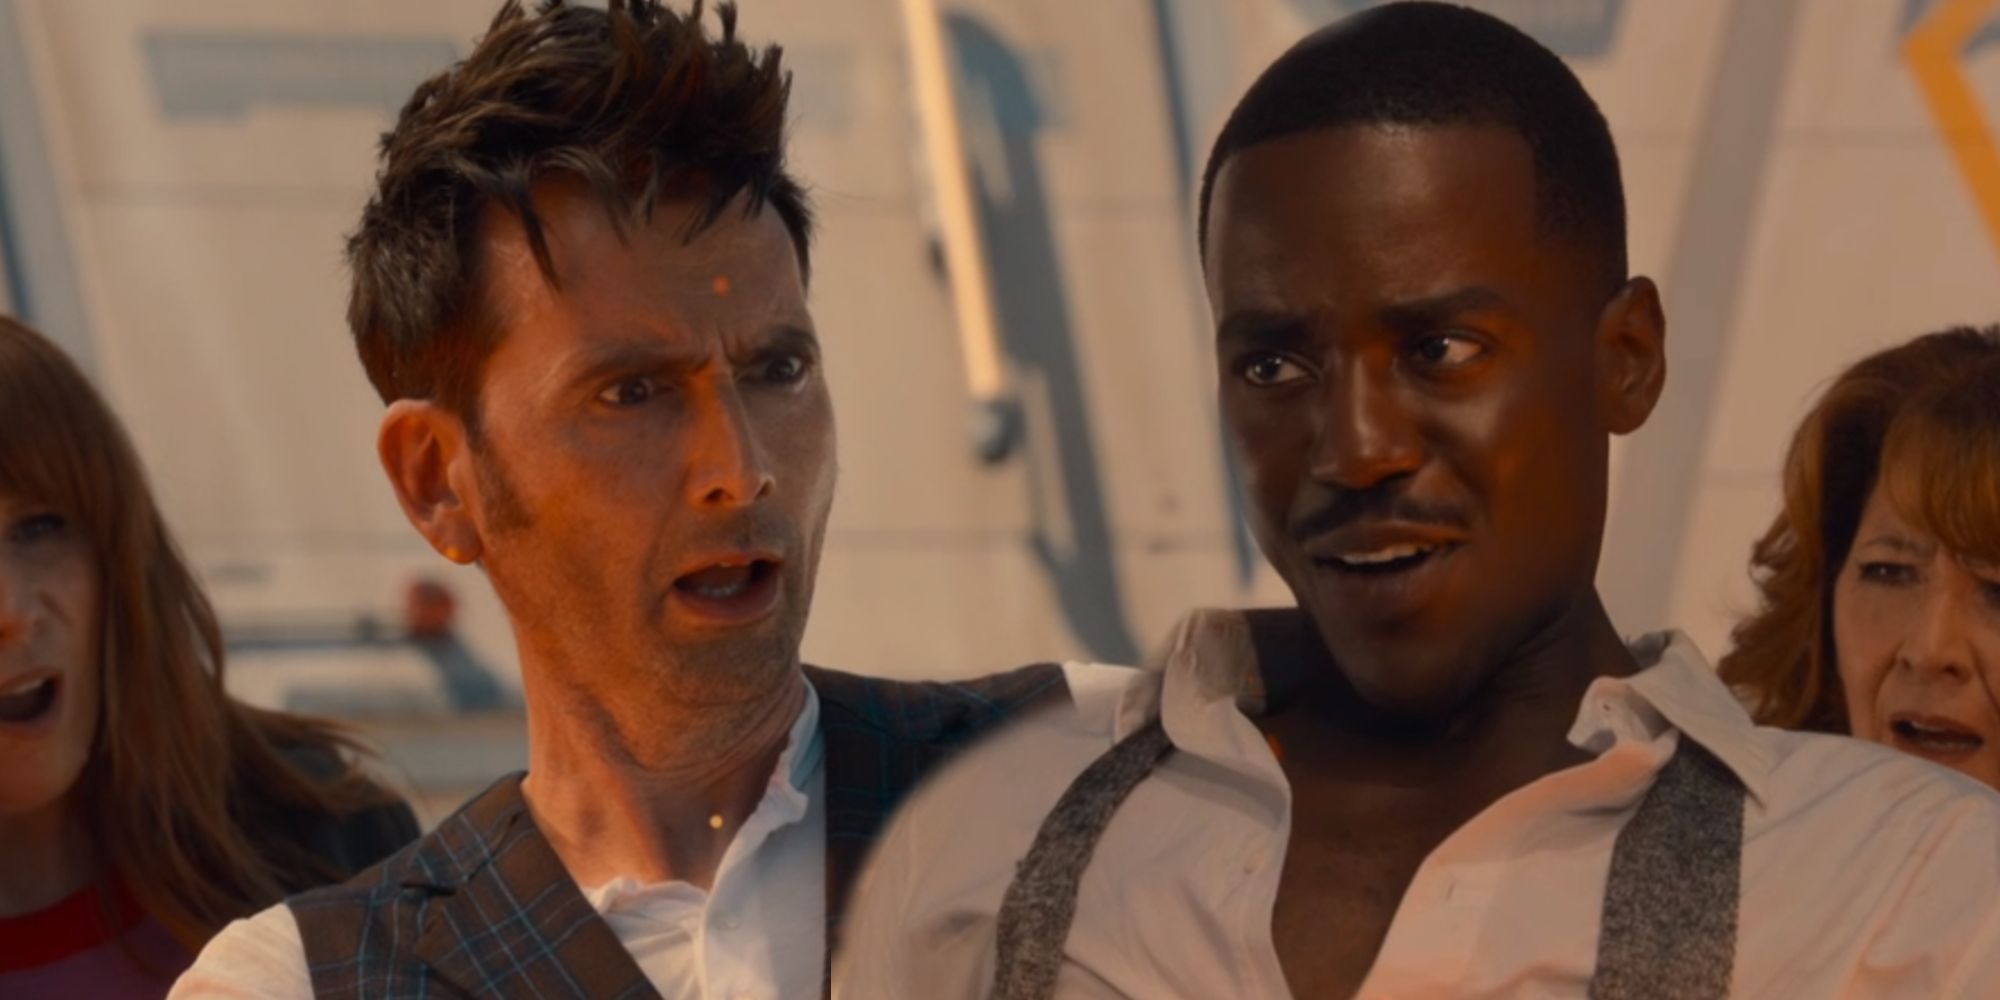 Doctor Who The Giggle David Tennant and Ncuti Gatwa as the Doctor